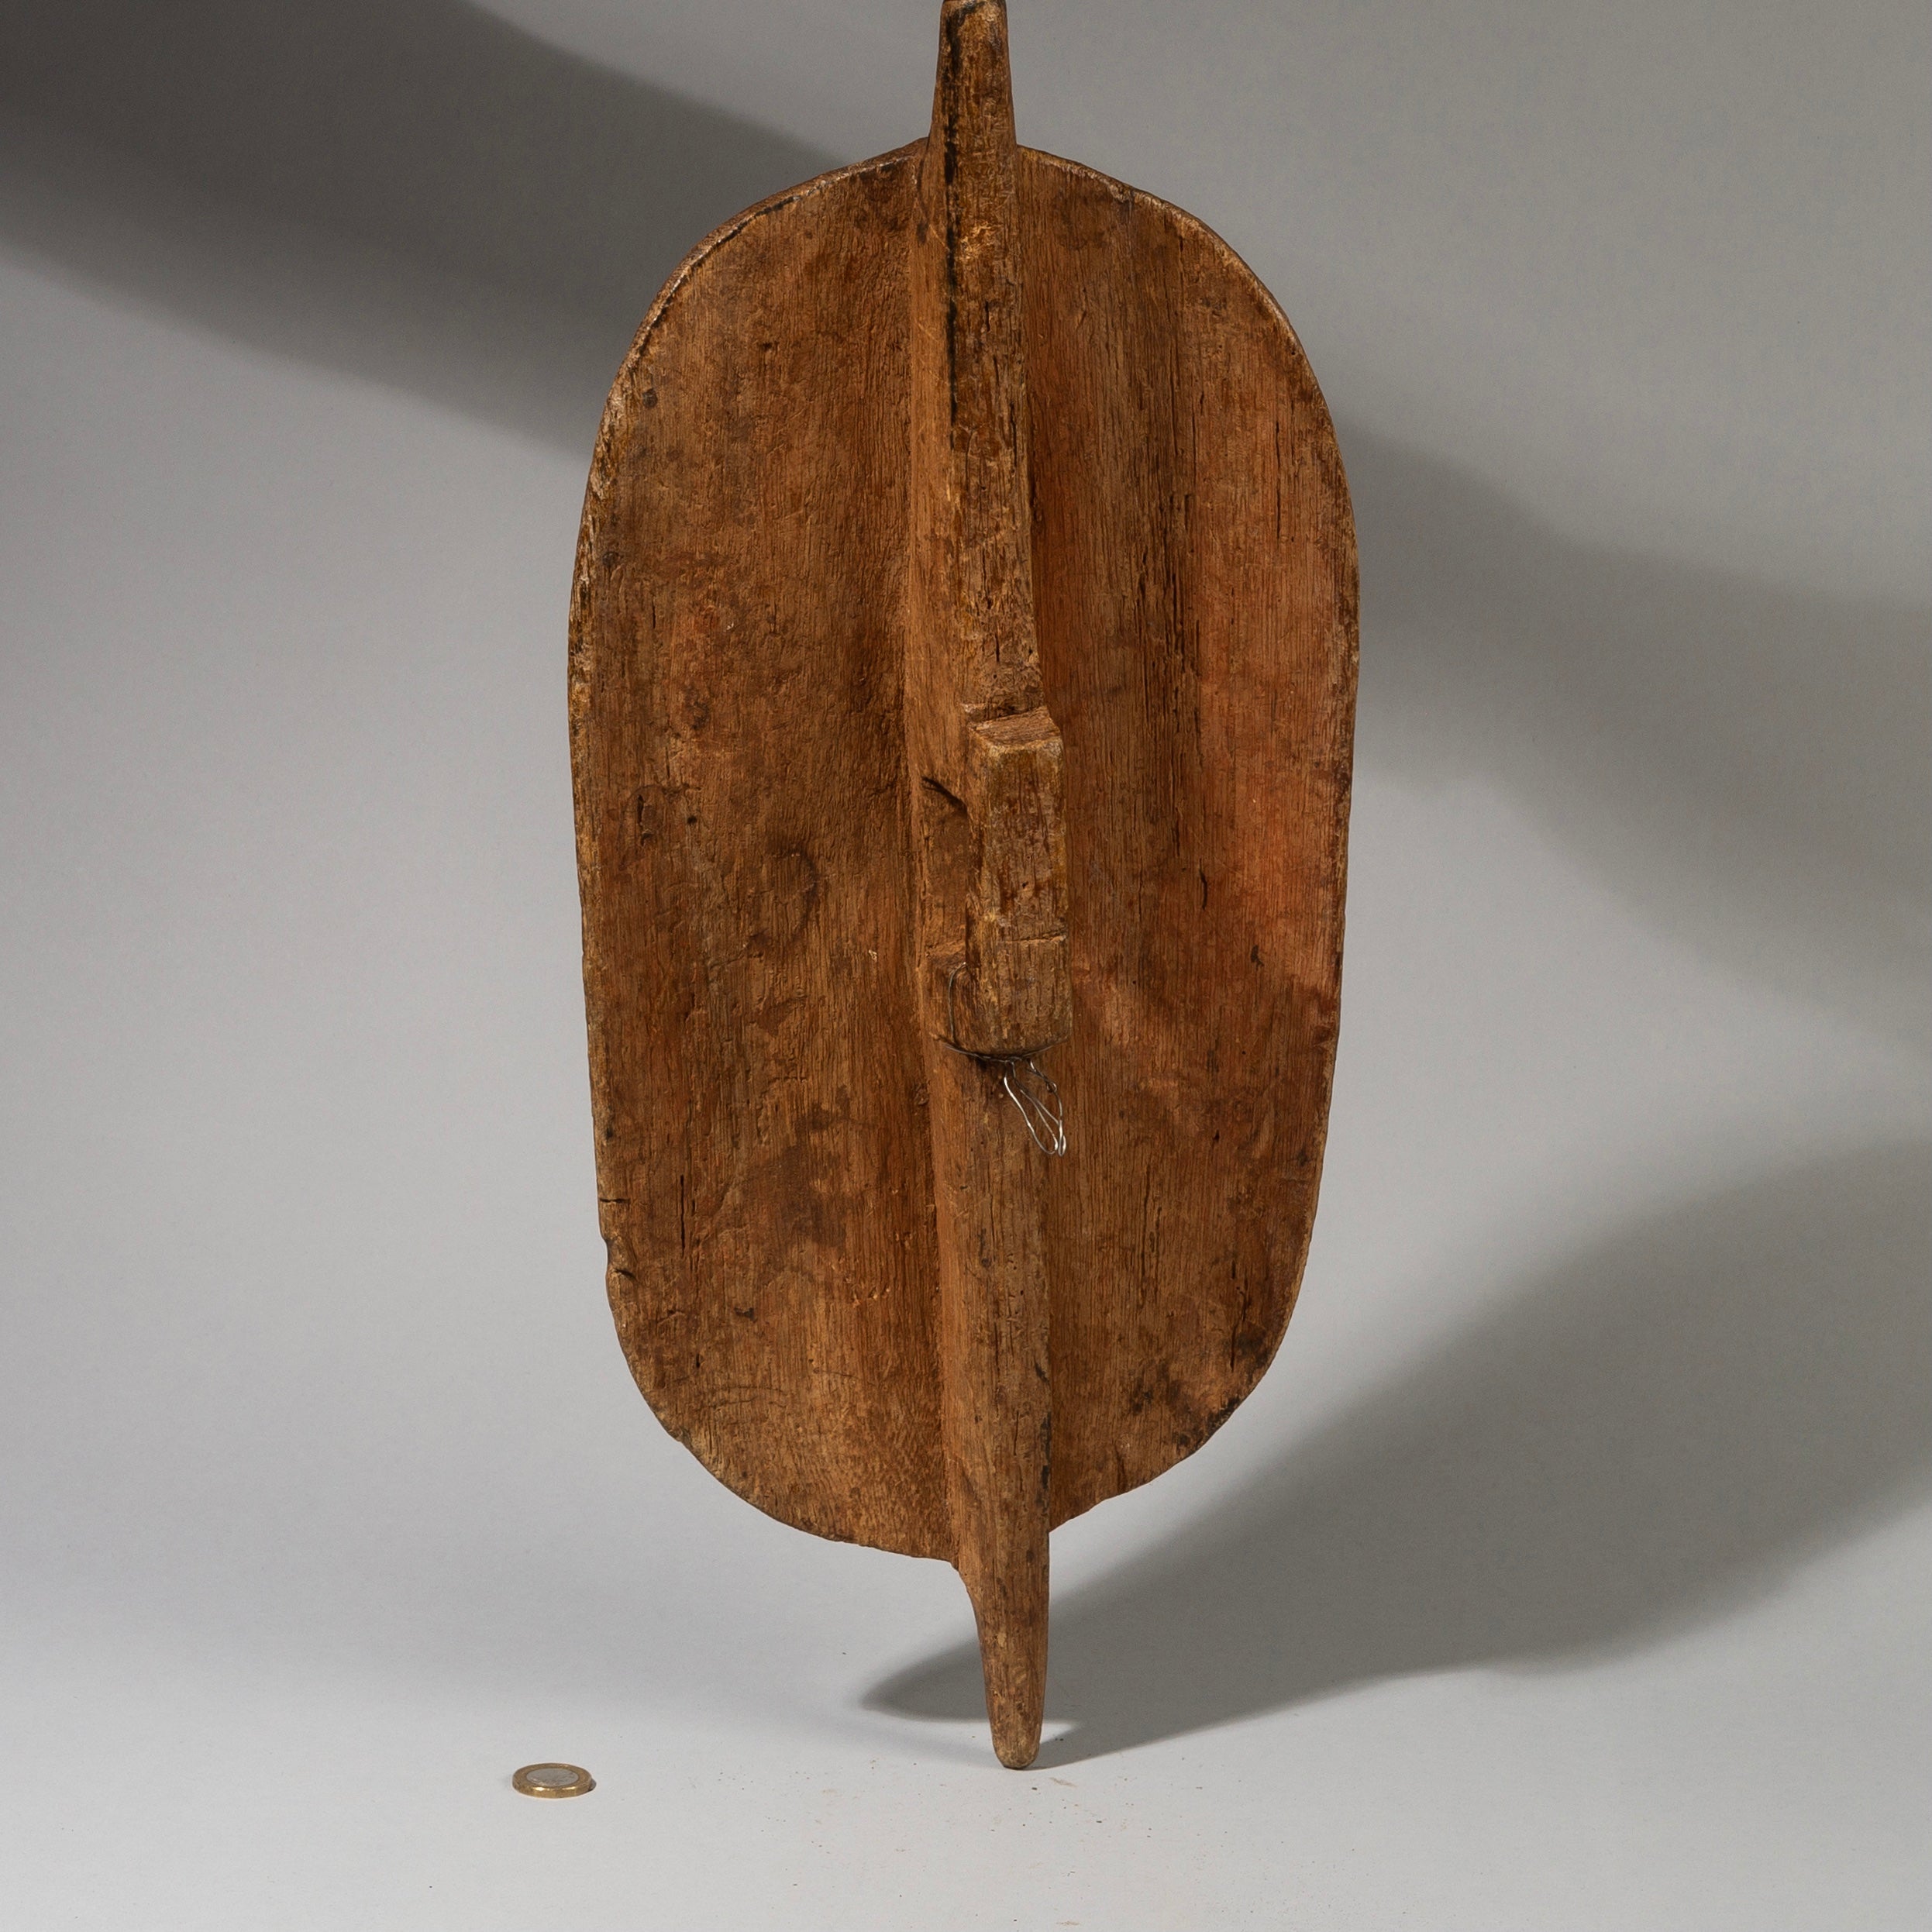 A SIMPLE WOODEN SHIELD FROM KENYA, EAST AFRICA  ( No 1030)